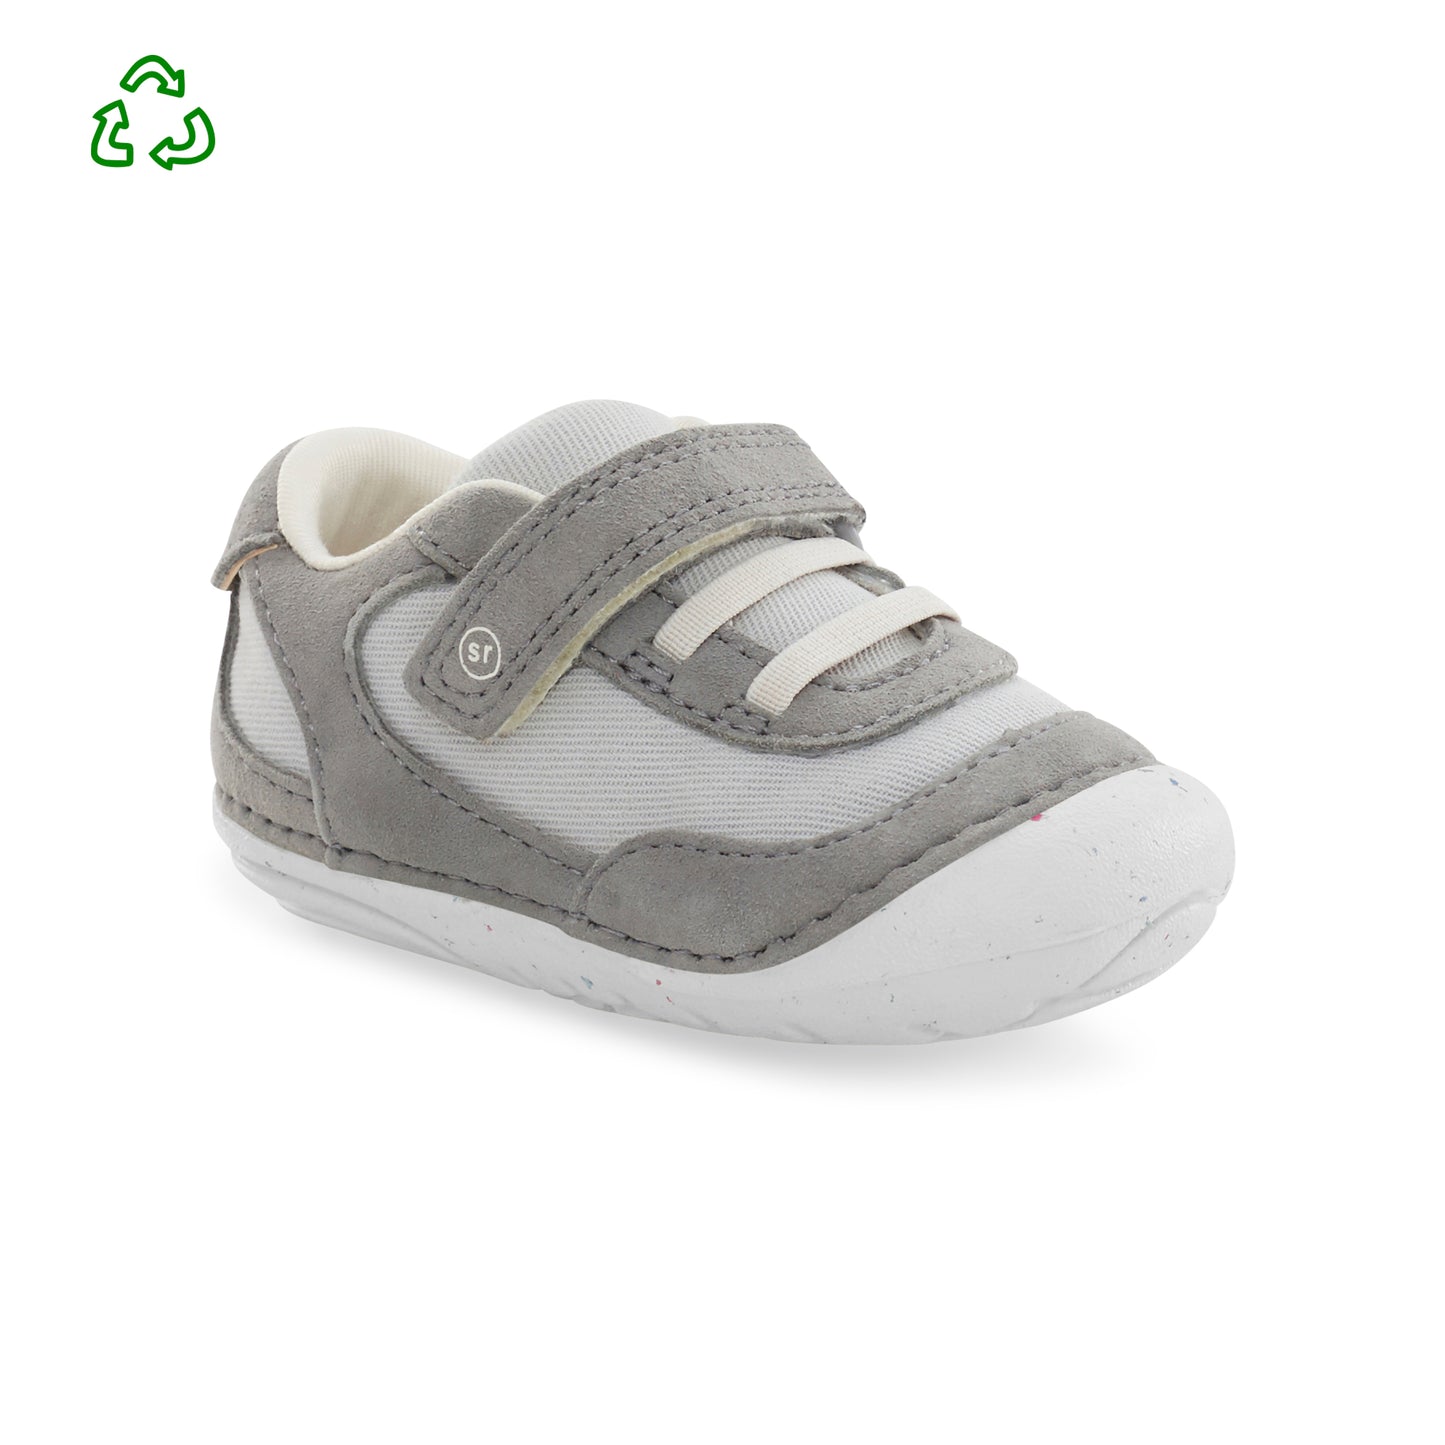 Sprout Sneaker Light Grey